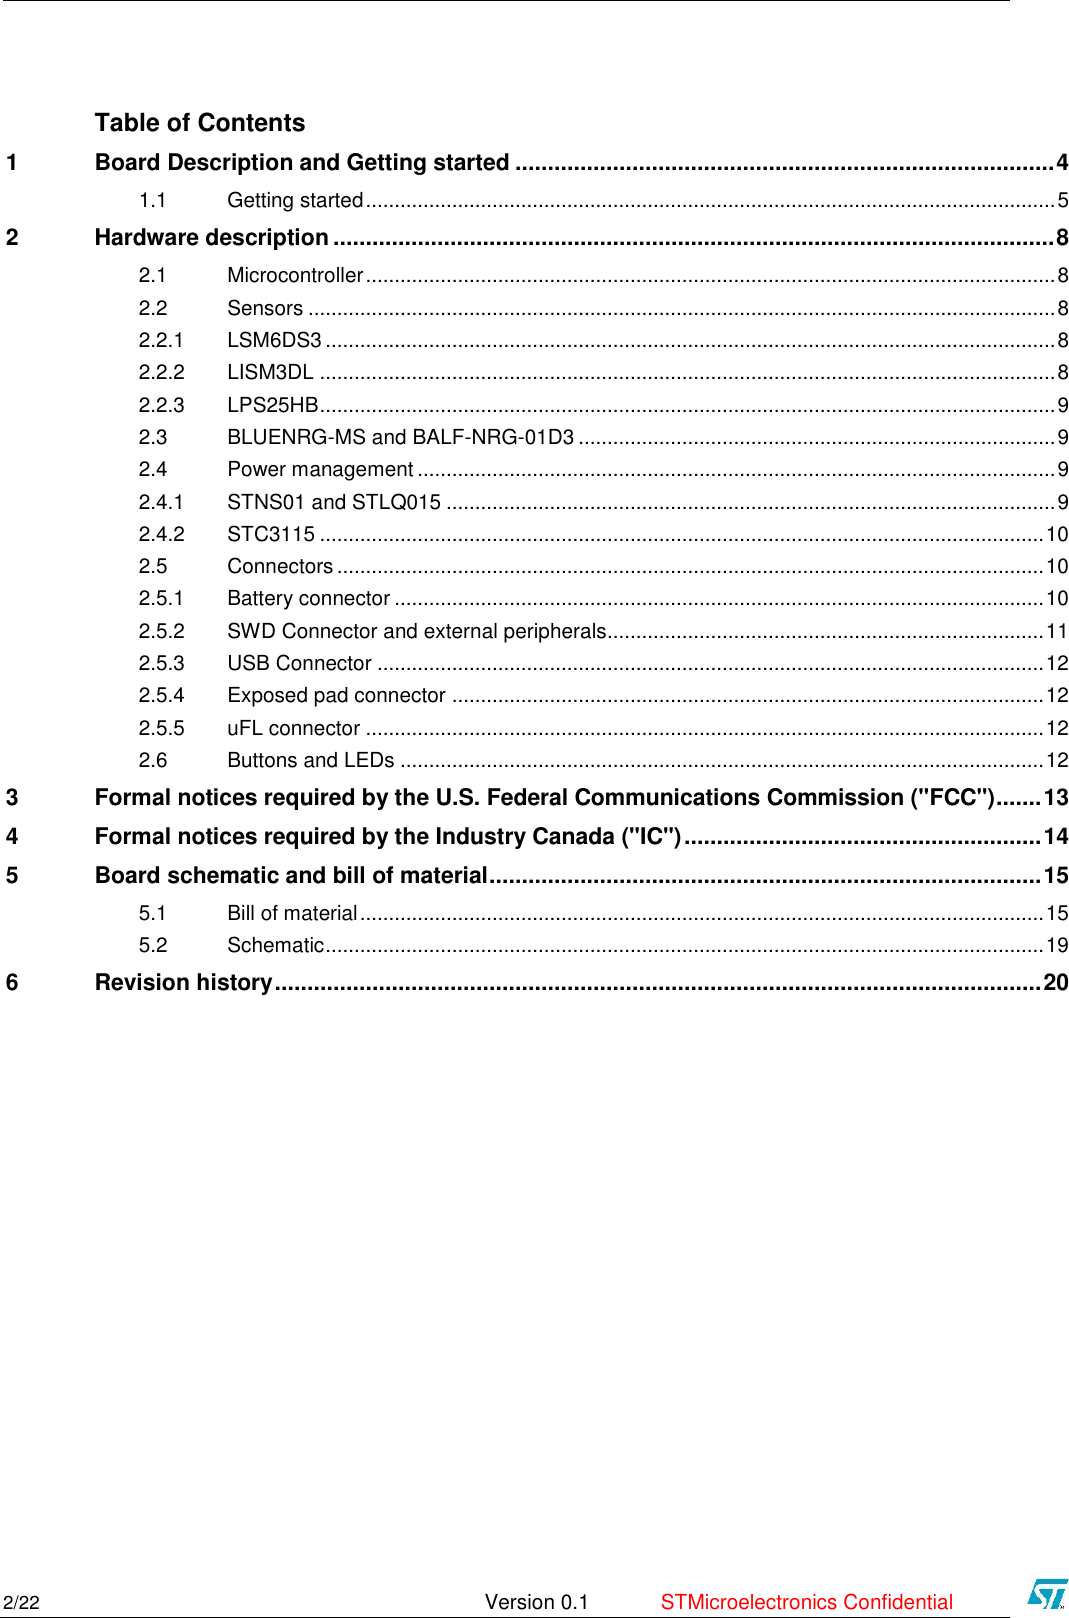      2/22   Version 0.1  STMicroelectronics Confidential   Table of Contents 1 Board Description and Getting started ................................................................................... 4 1.1 Getting started ........................................................................................................................ 5 2 Hardware description ............................................................................................................... 8 2.1 Microcontroller ........................................................................................................................ 8 2.2 Sensors .................................................................................................................................. 8 2.2.1 LSM6DS3 ............................................................................................................................... 8 2.2.2 LISM3DL ................................................................................................................................ 8 2.2.3 LPS25HB ................................................................................................................................ 9 2.3 BLUENRG-MS and BALF-NRG-01D3 ................................................................................... 9 2.4 Power management ............................................................................................................... 9 2.4.1 STNS01 and STLQ015 .......................................................................................................... 9 2.4.2 STC3115 .............................................................................................................................. 10 2.5 Connectors ........................................................................................................................... 10 2.5.1 Battery connector ................................................................................................................. 10 2.5.2 SWD Connector and external peripherals............................................................................ 11 2.5.3 USB Connector .................................................................................................................... 12 2.5.4 Exposed pad connector ....................................................................................................... 12 2.5.5 uFL connector ...................................................................................................................... 12 2.6 Buttons and LEDs ................................................................................................................ 12 3 Formal notices required by the U.S. Federal Communications Commission (&quot;FCC&quot;) ....... 13 4 Formal notices required by the Industry Canada (&quot;IC&quot;) ....................................................... 14 5 Board schematic and bill of material ..................................................................................... 15 5.1 Bill of material ....................................................................................................................... 15 5.2 Schematic ............................................................................................................................. 19 6 Revision history ...................................................................................................................... 20     